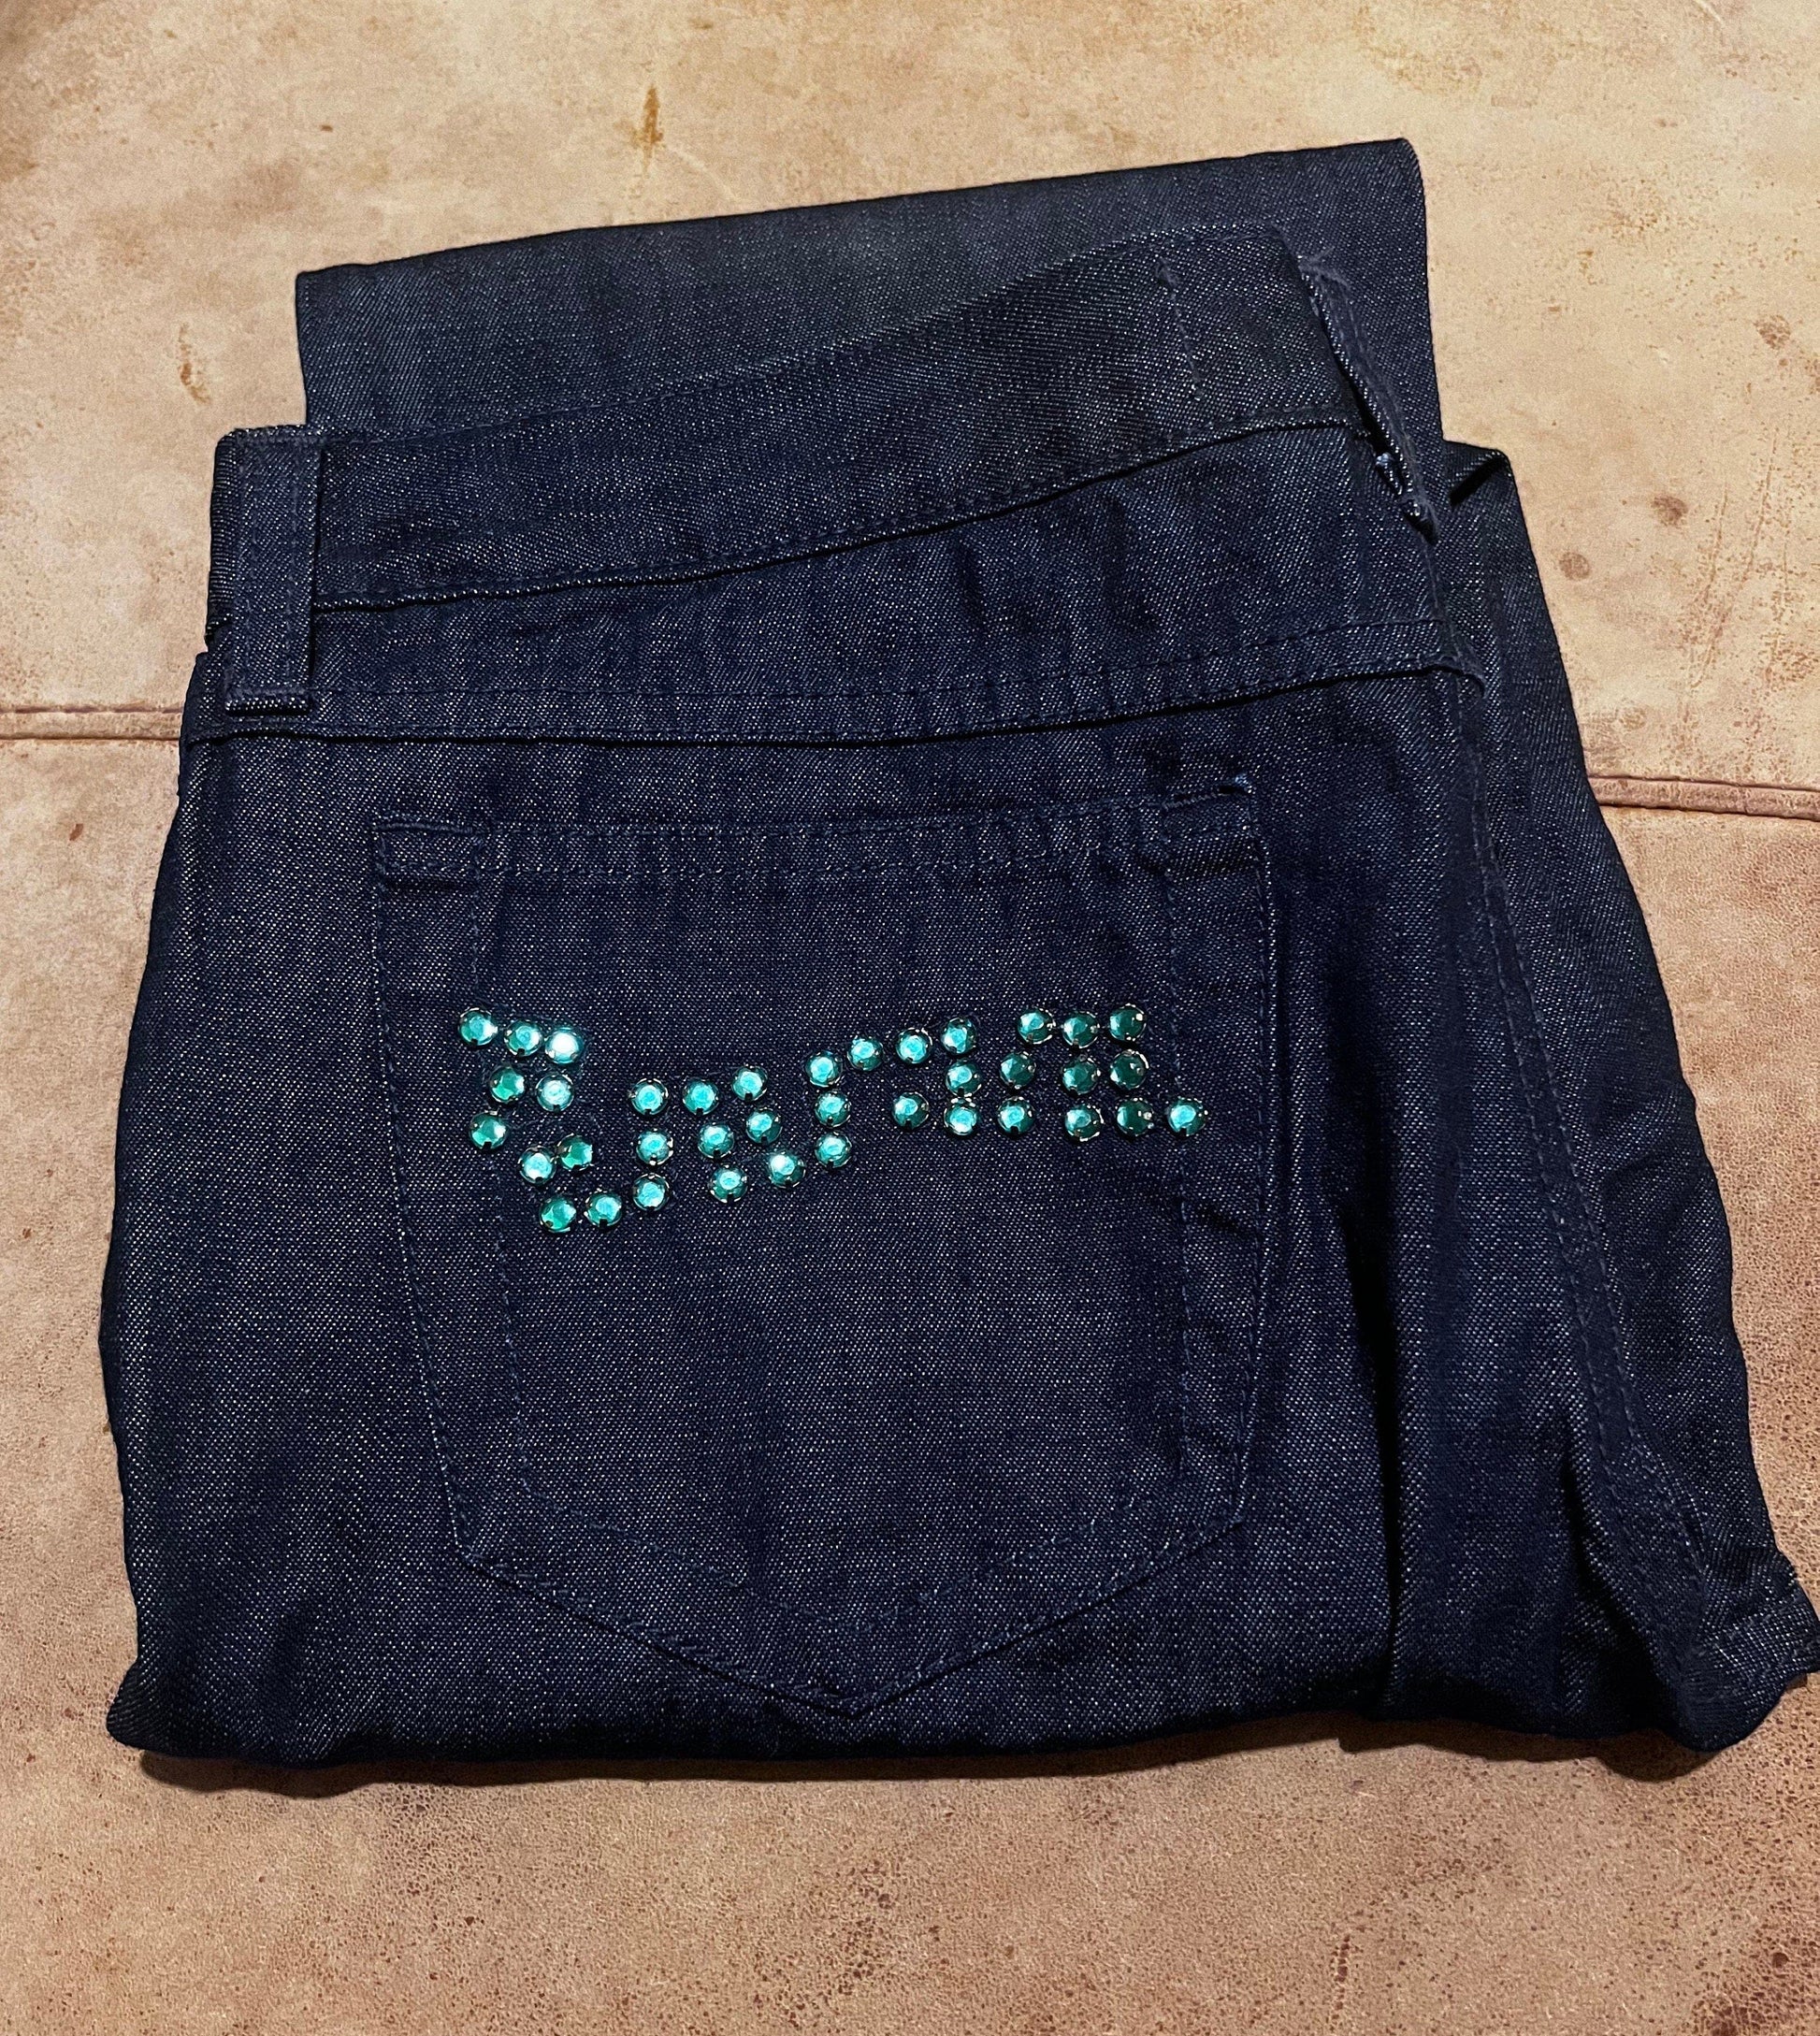 Vintage Versace Jeans Signature Couture Jeans in dark blue over-dye denim and turquoise green rhinestone to back pockets UK8-10 - Unworn